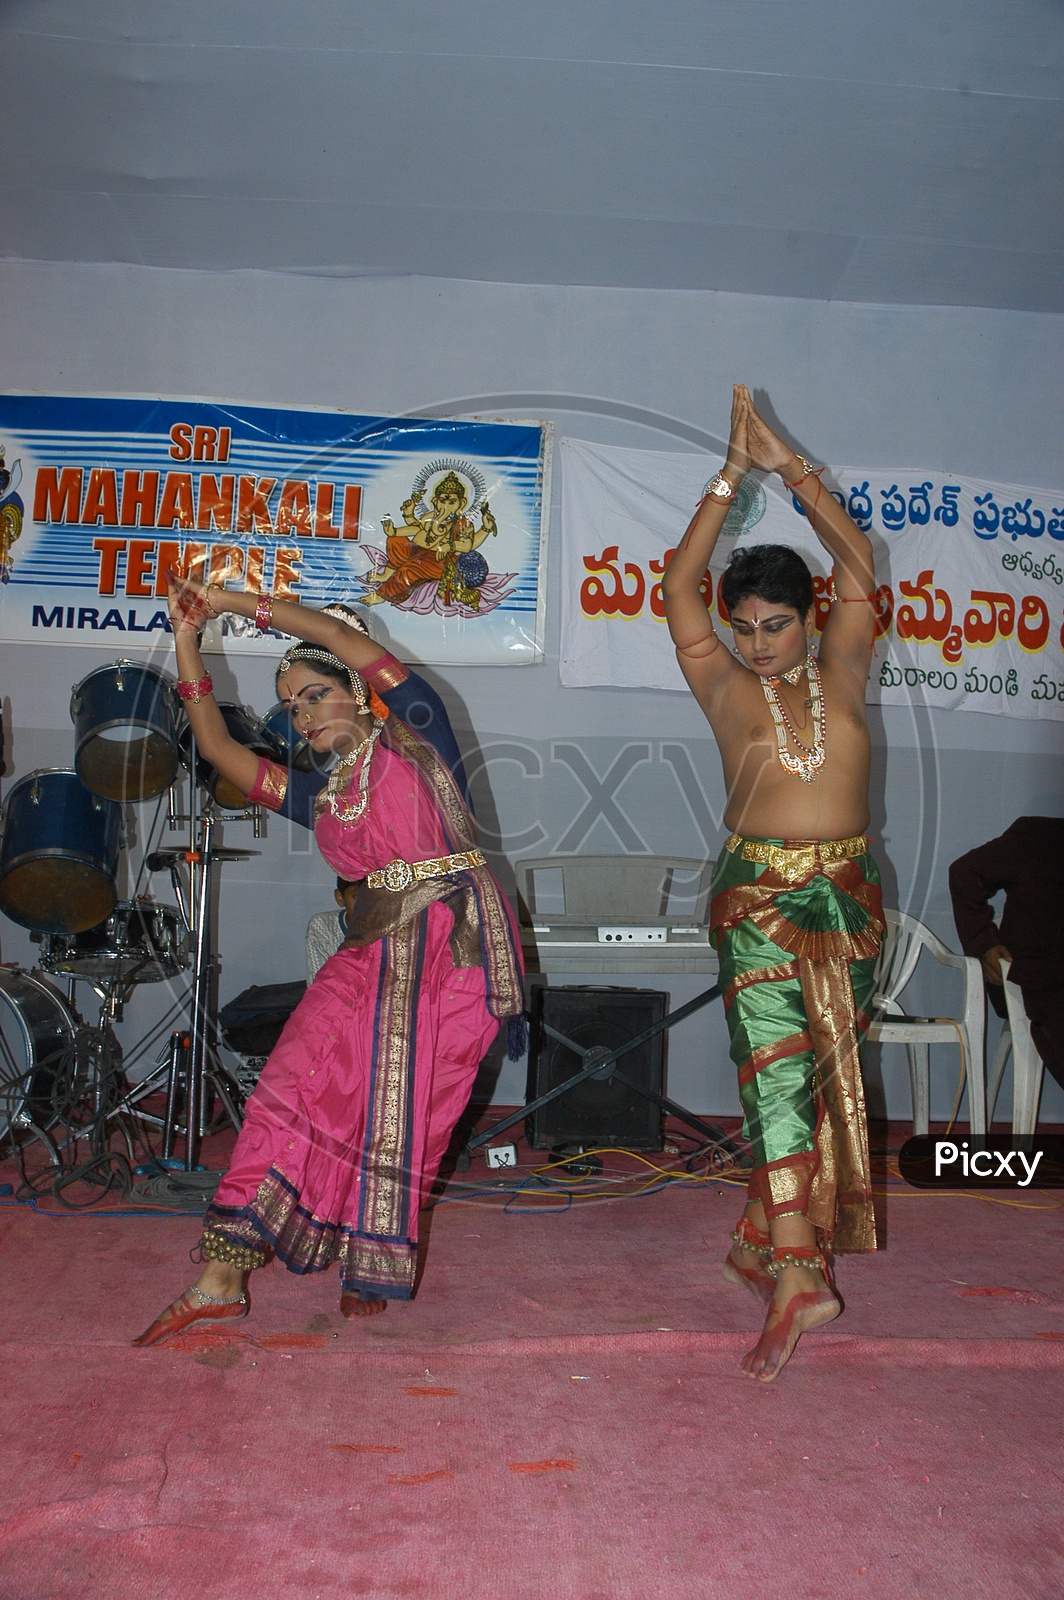 Bharathanatyam Dance Artists Performing On a Stage